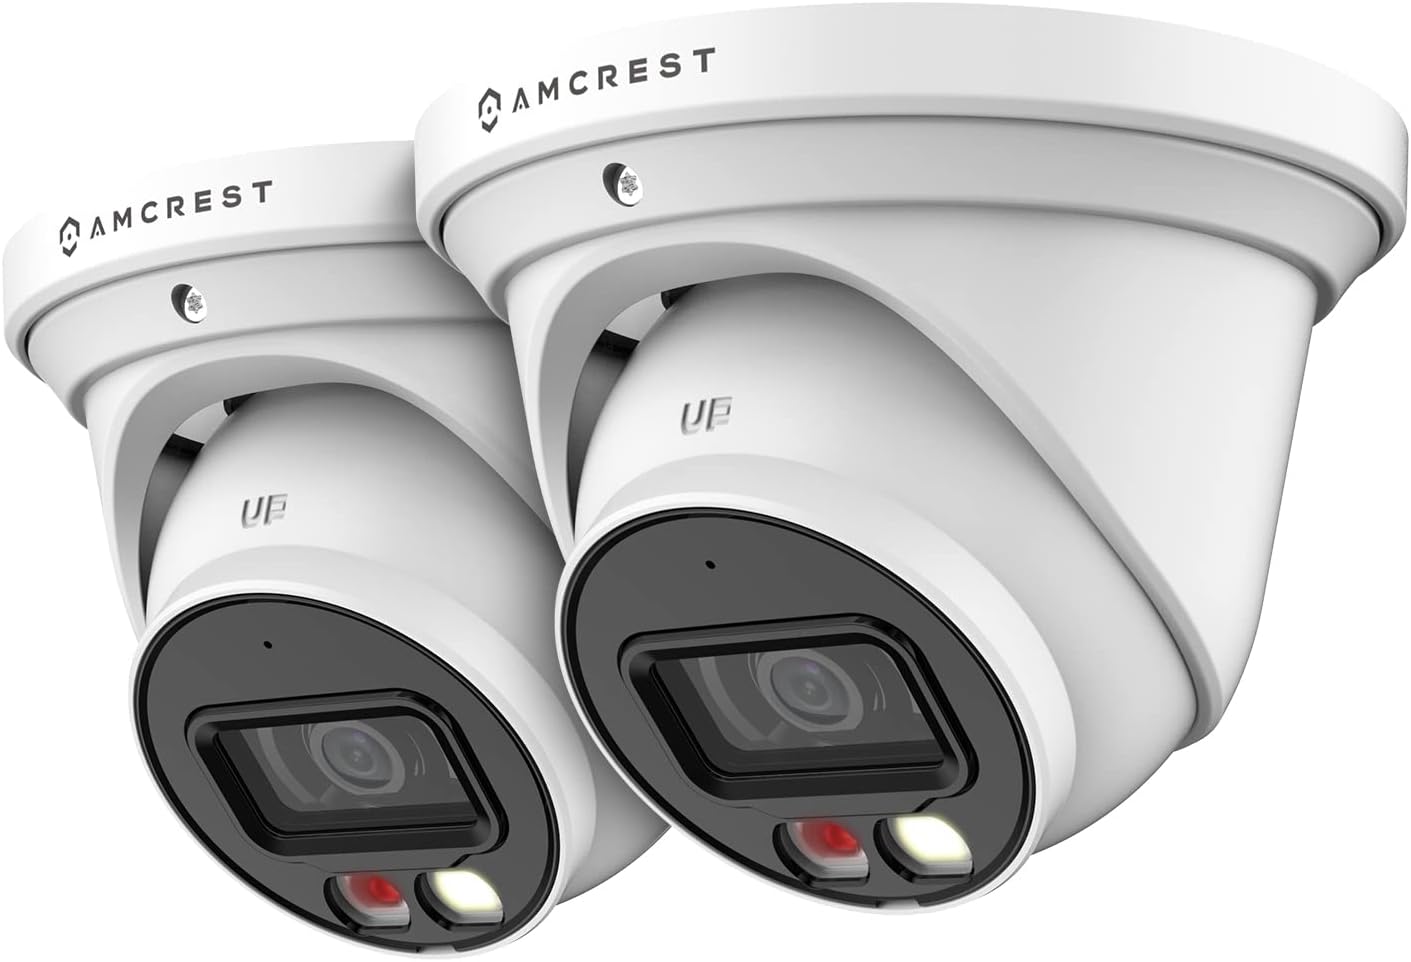 Amcrest 2-Pack UltraHD 4K (8MP) IP PoE AI Camera, 49ft Nightcolor, Security Outdoor Turret Camera, Built-in Mic, Human Detection, Active Deterrent, 129 FOV, 4K@15fps